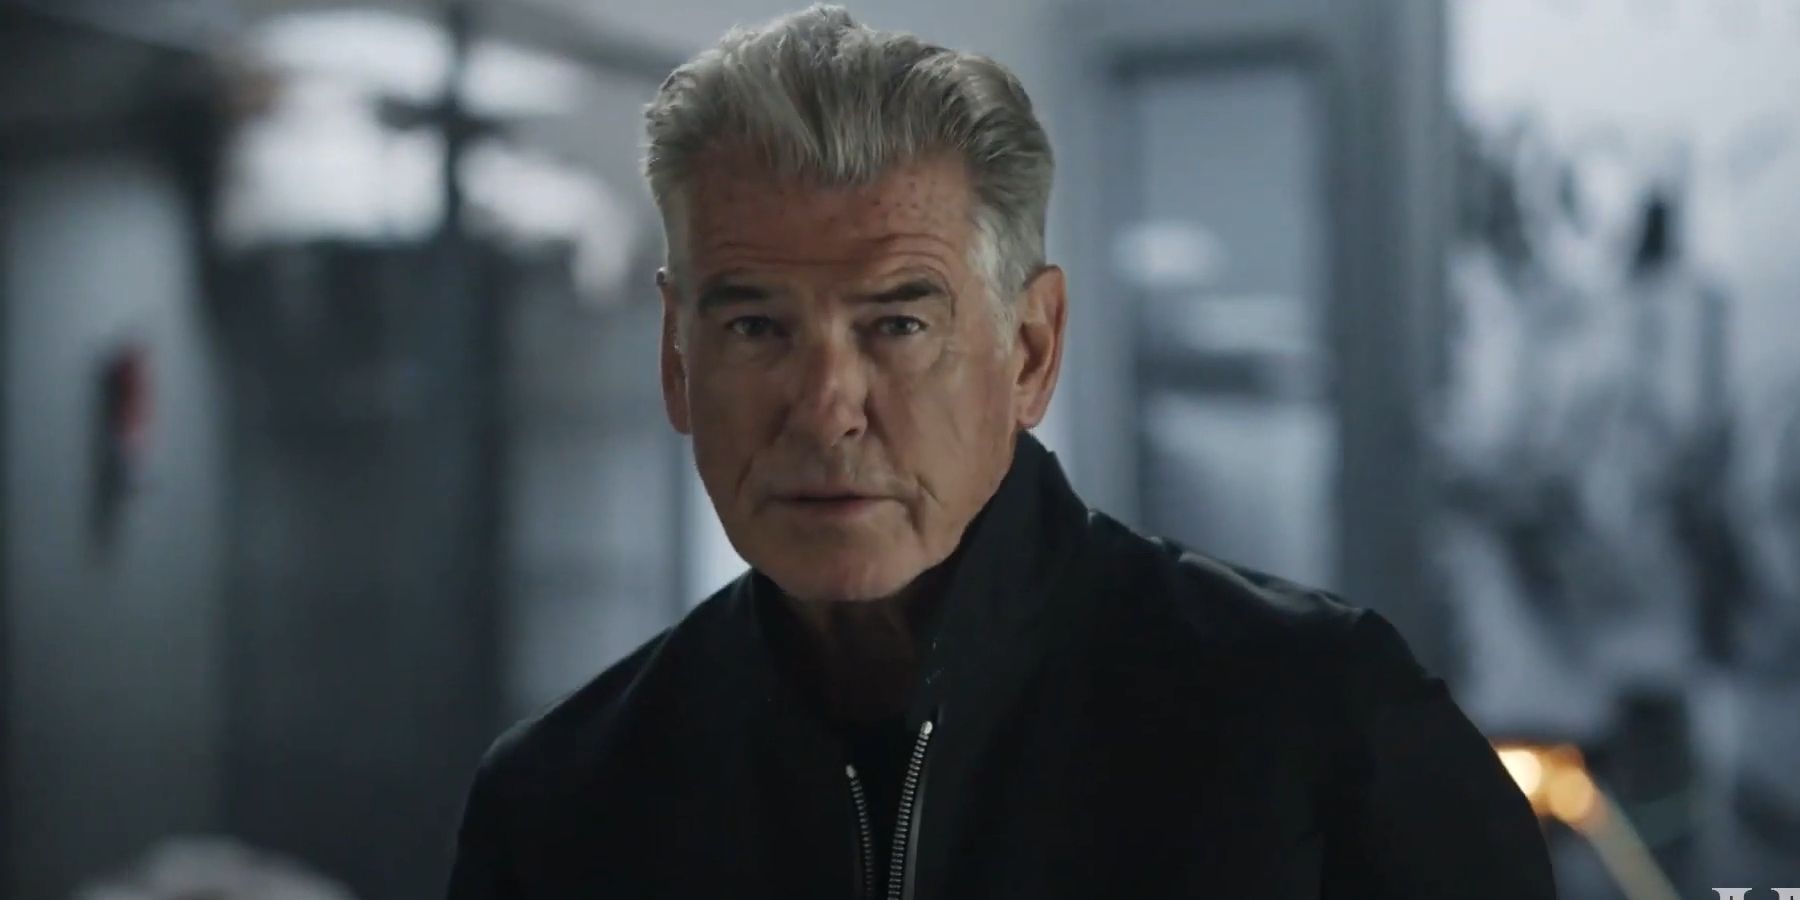 Pierce Brosnan talking to the camera in History's Greatest Heists